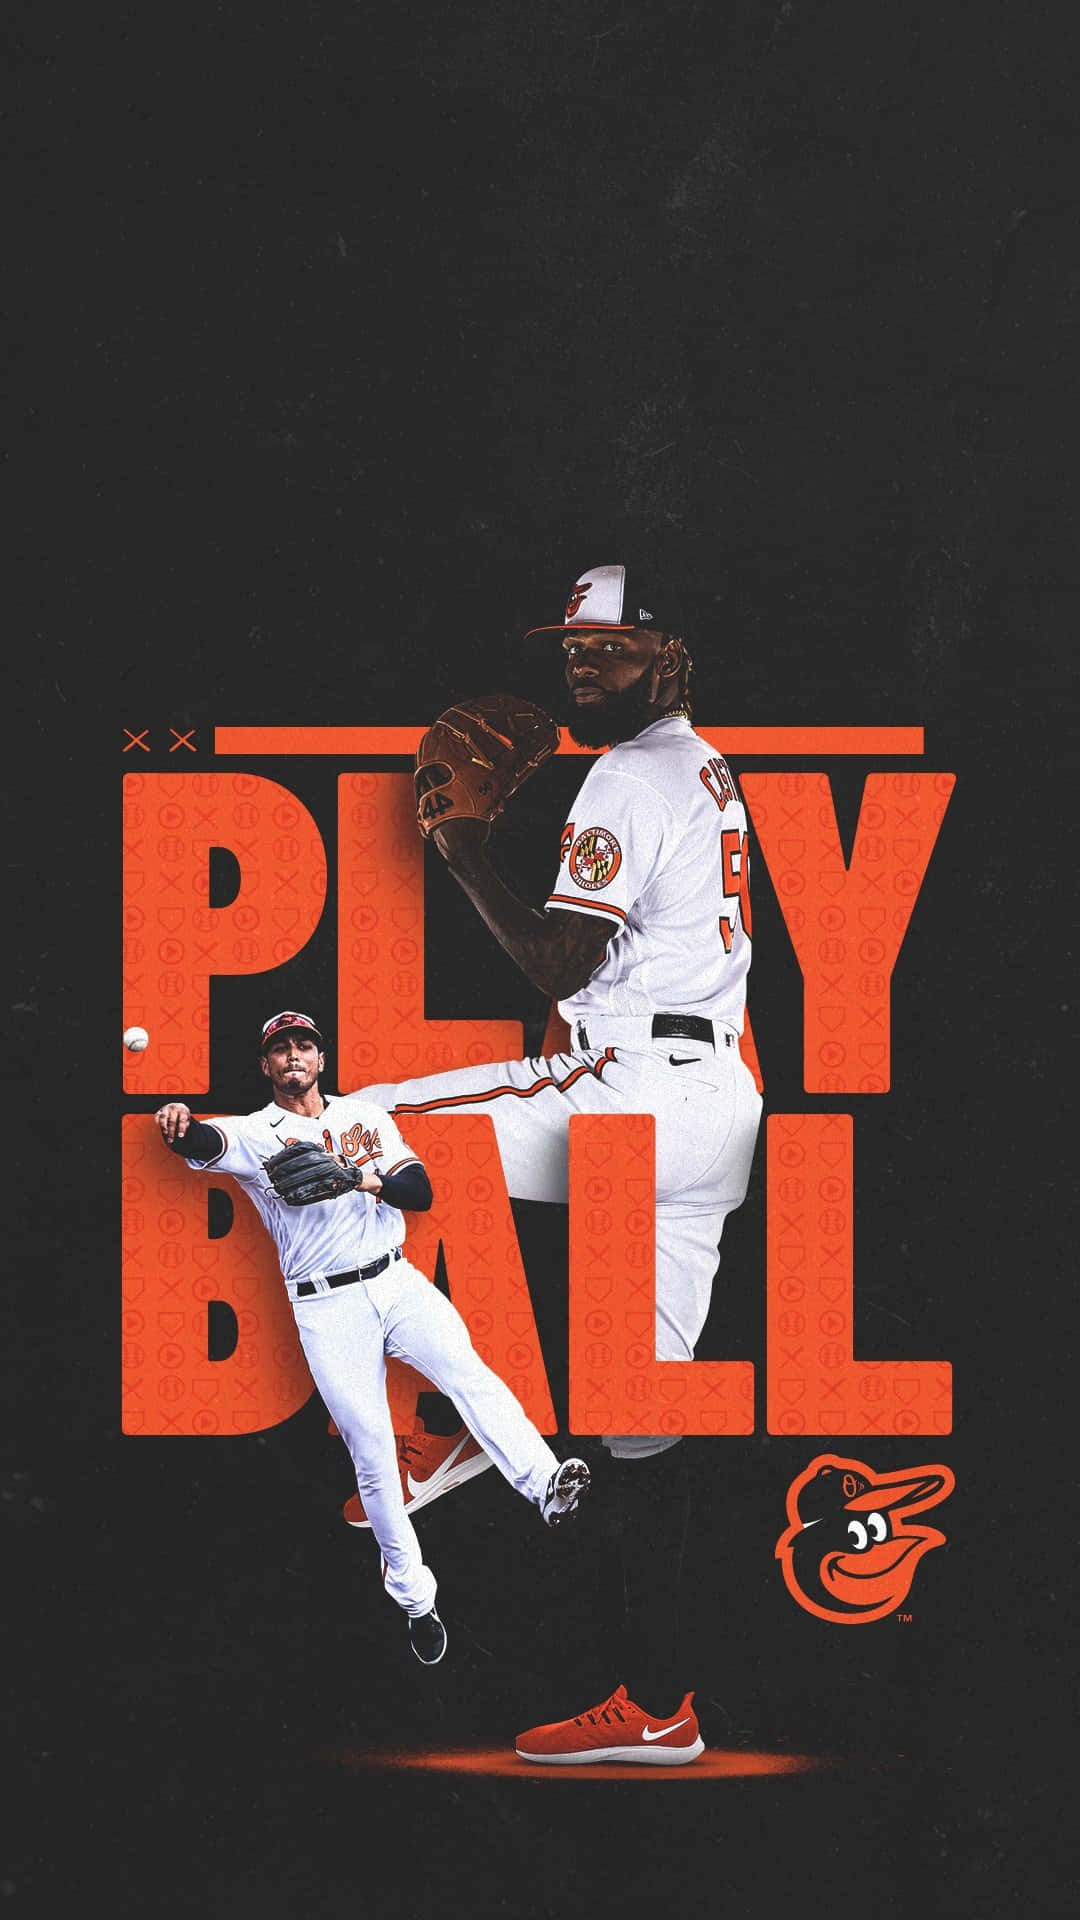 High-intensity Baseball Game In The Mlb League Wallpaper